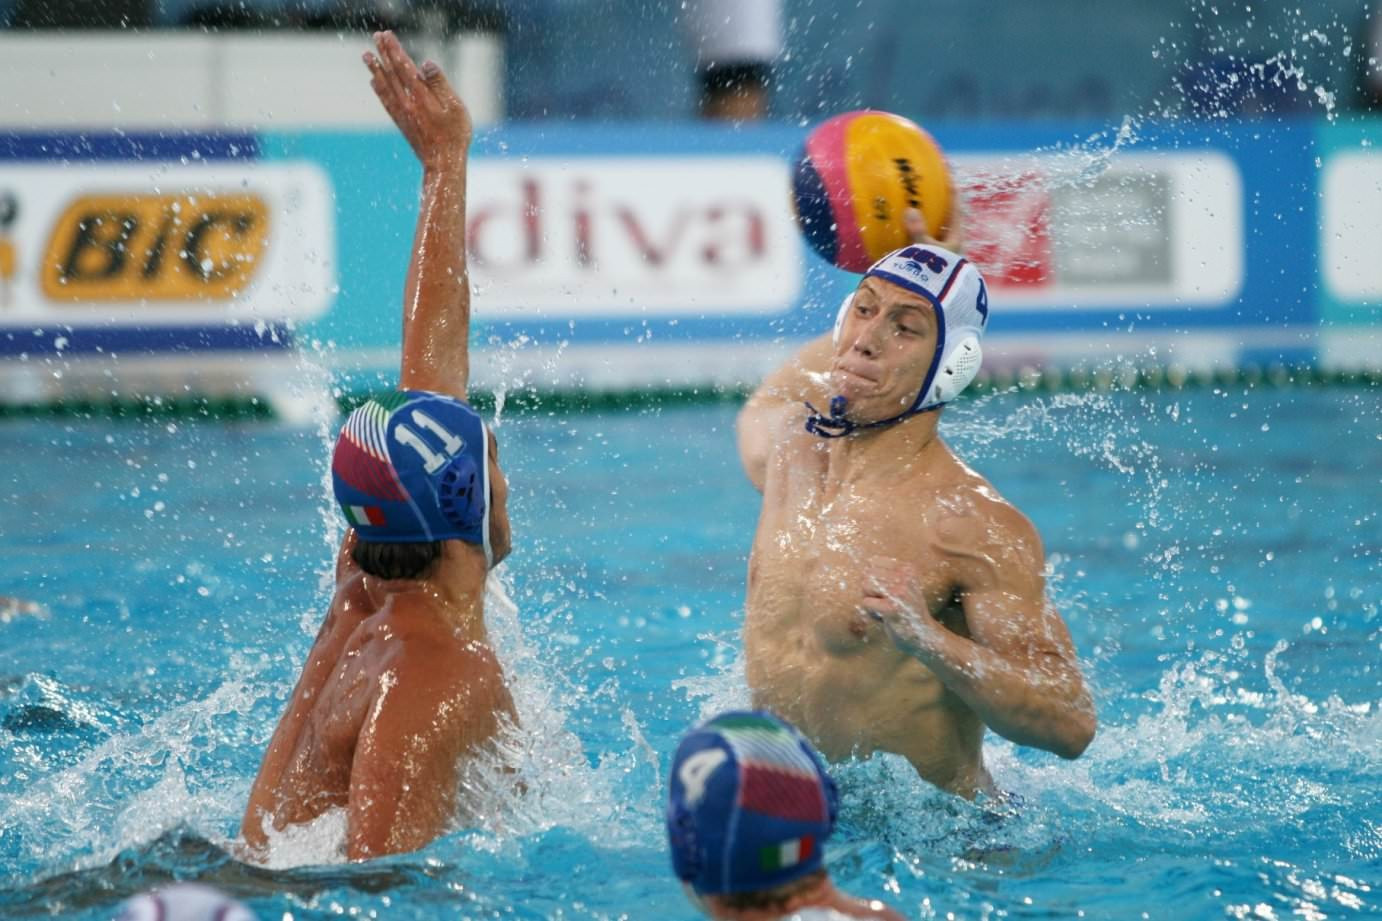 Italy to meet Serbia in repeat of 2015 final at World Men's Junior Water Polo Championships